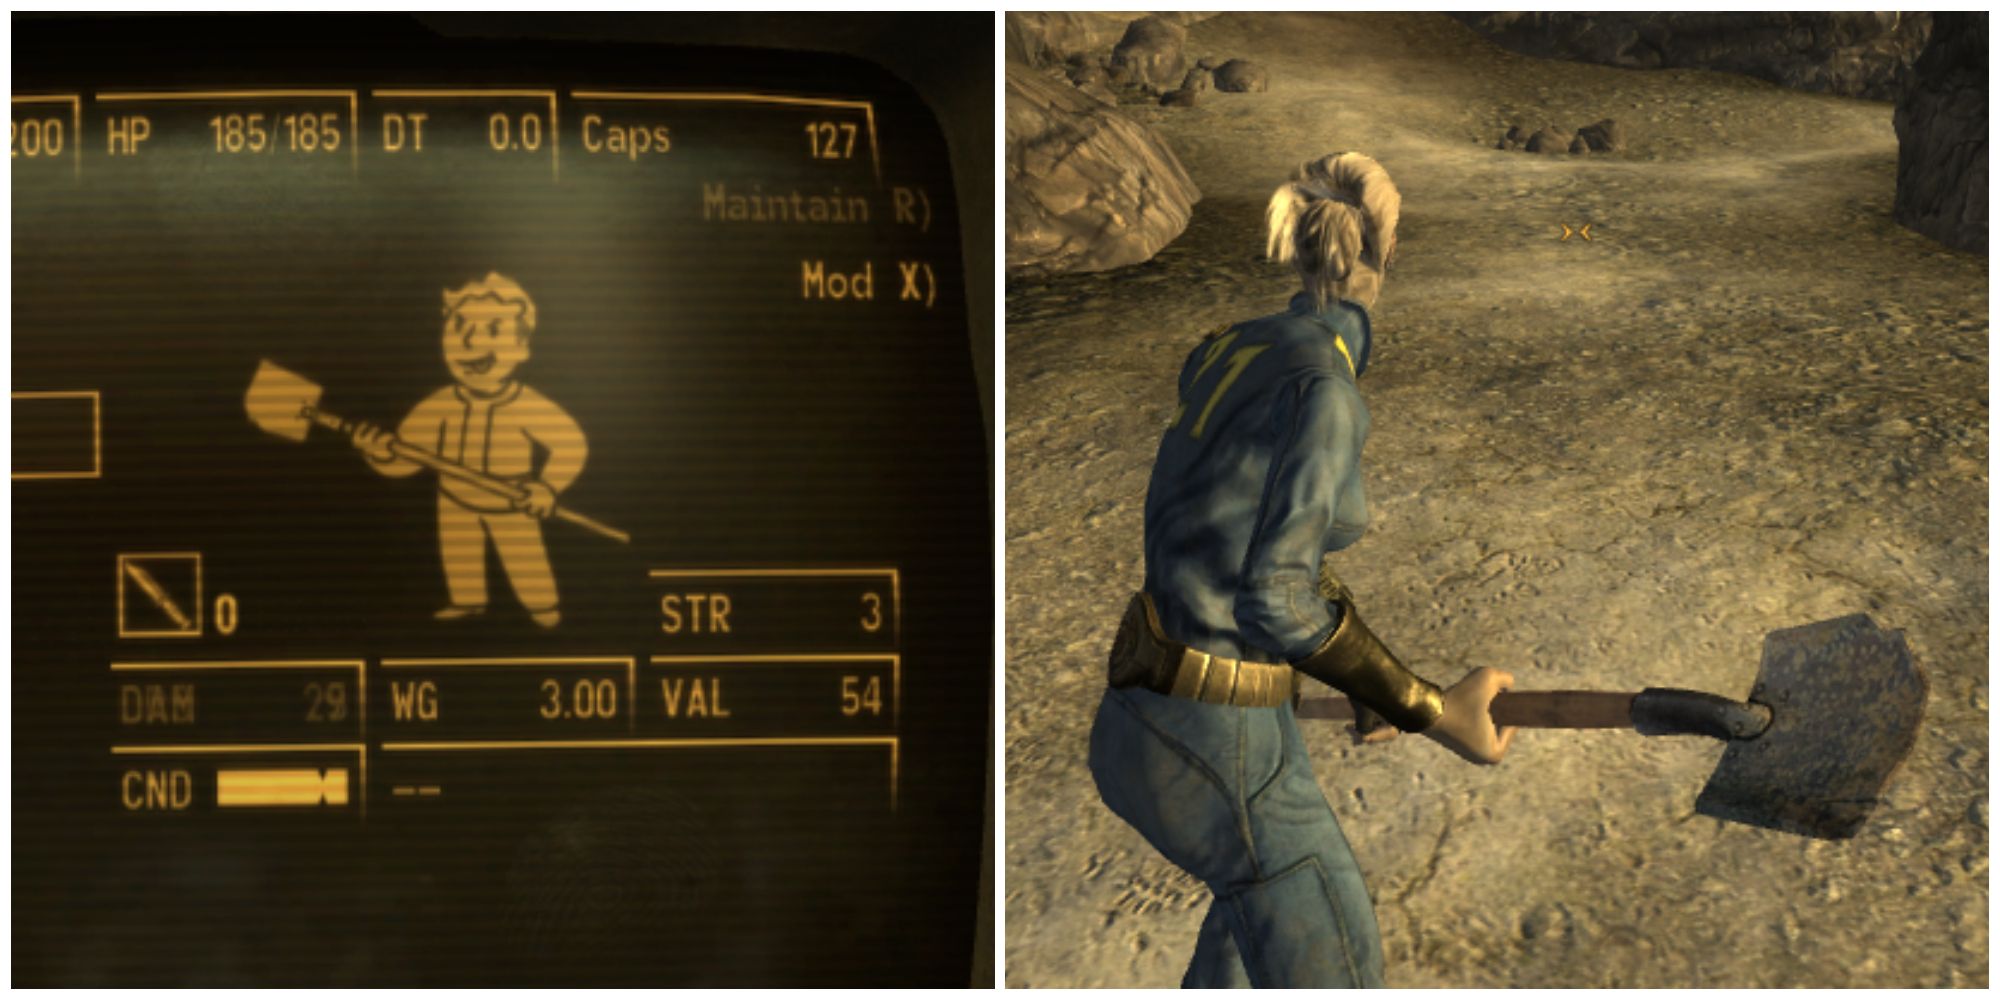 Split image of the shovel weapon in inventory and a character holding the shovel in Fallout New Vegas